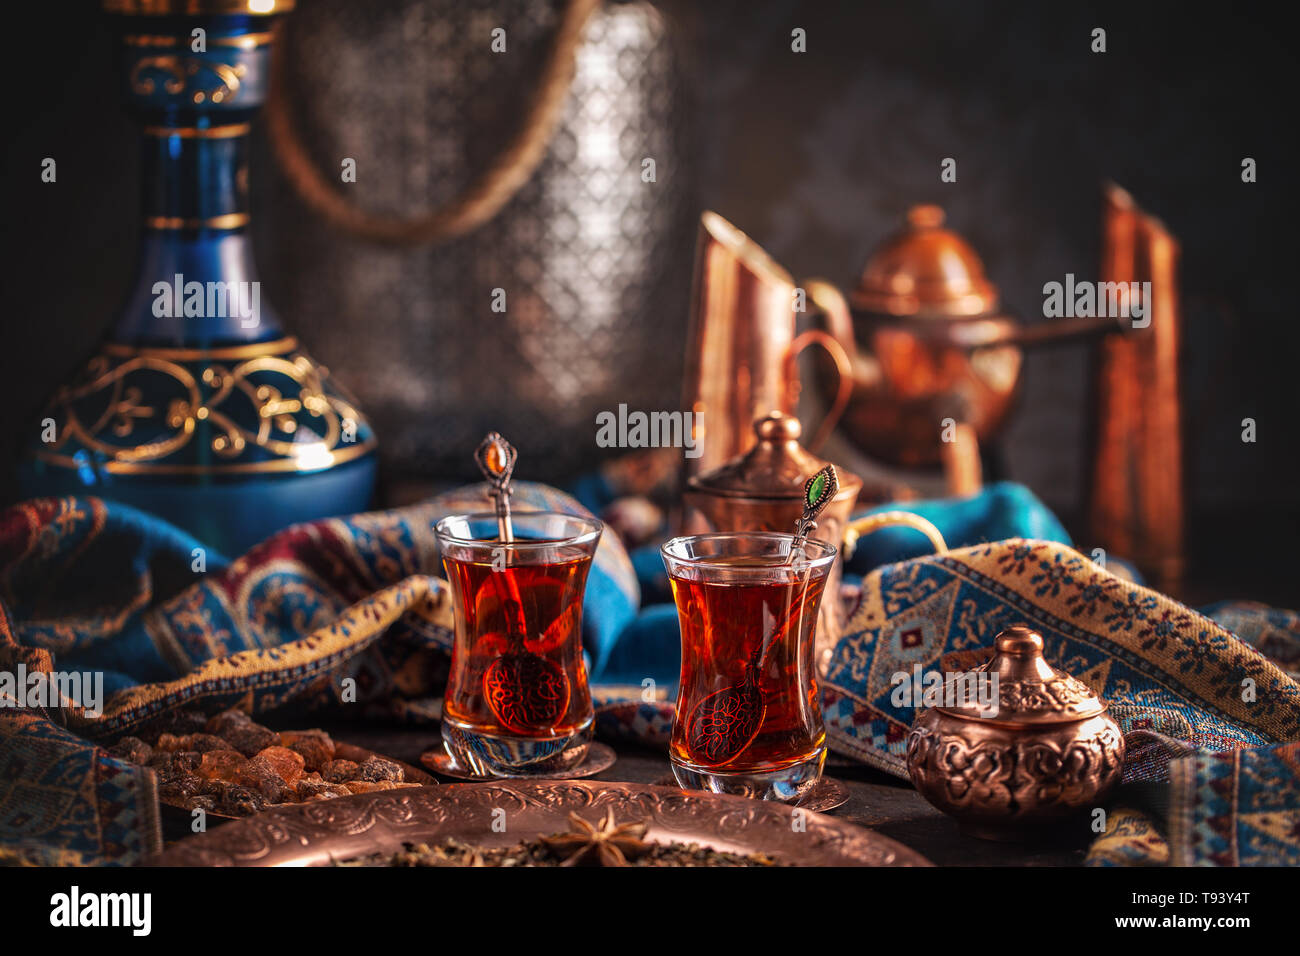 Cup of turkish tea served in traditional style Stock Photo